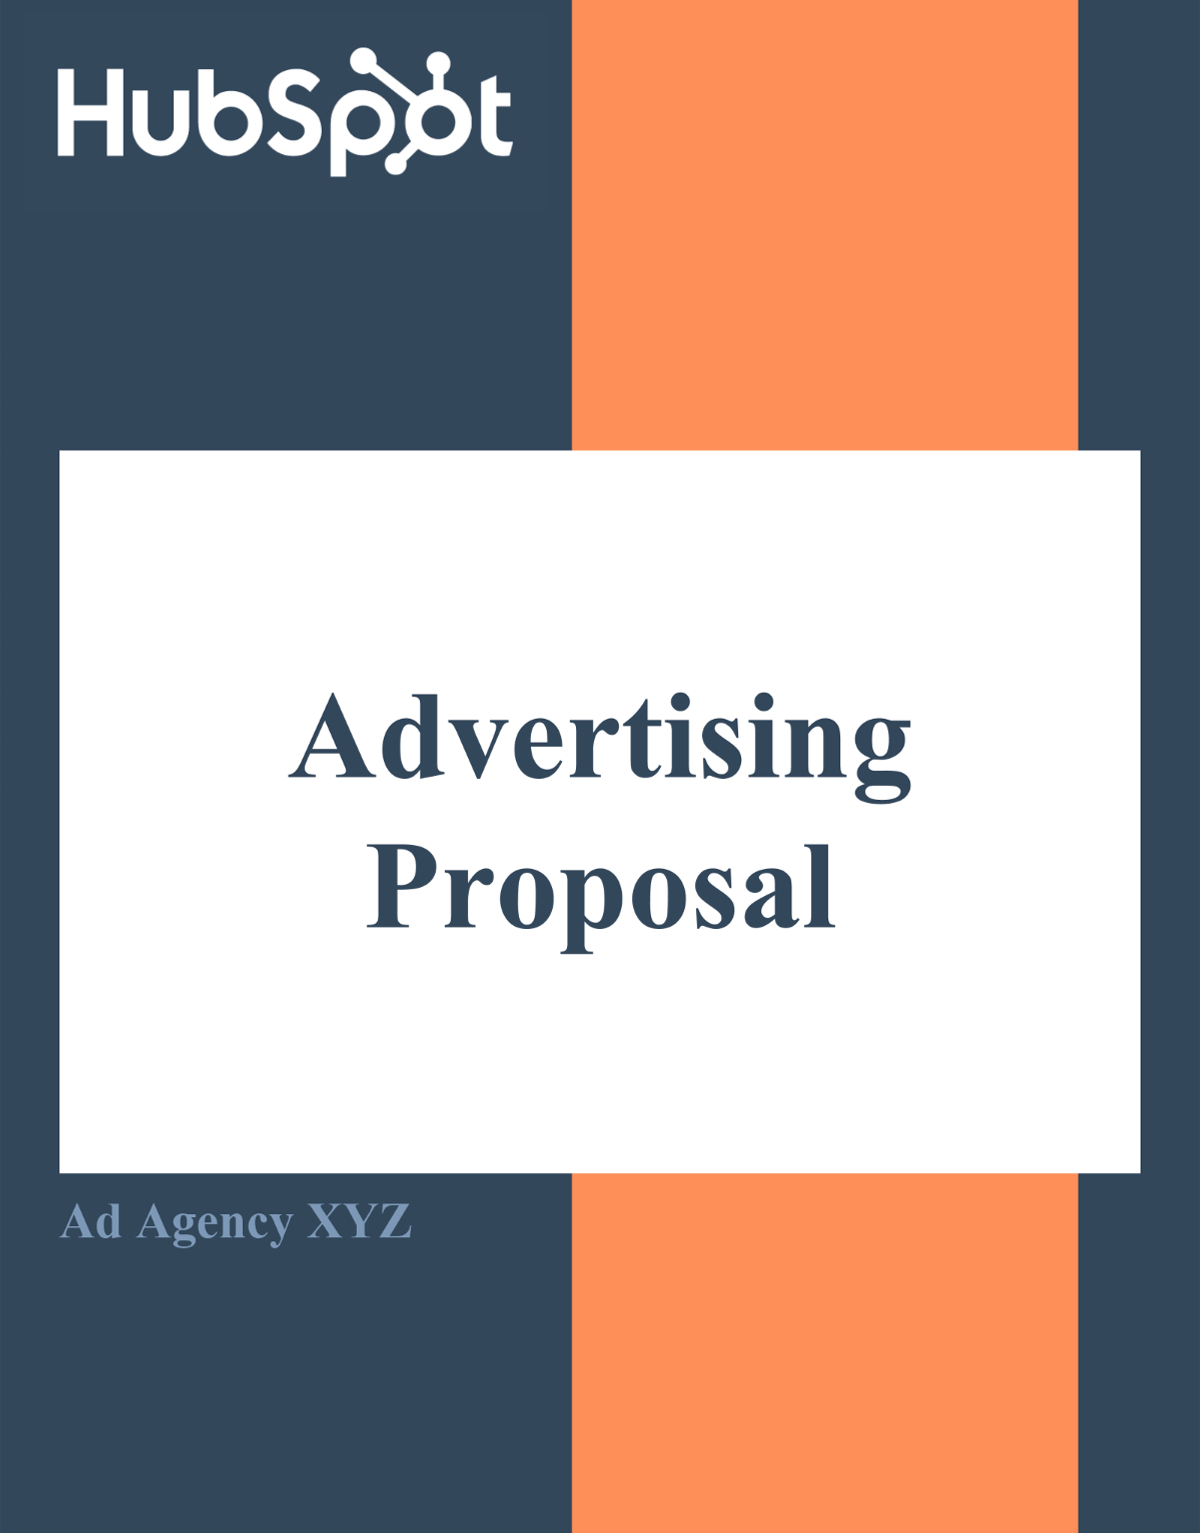 20 Free Proposals, Estimates & Quotes Templates & Examples  HubSpot With Regard To Advertising Proposal Template